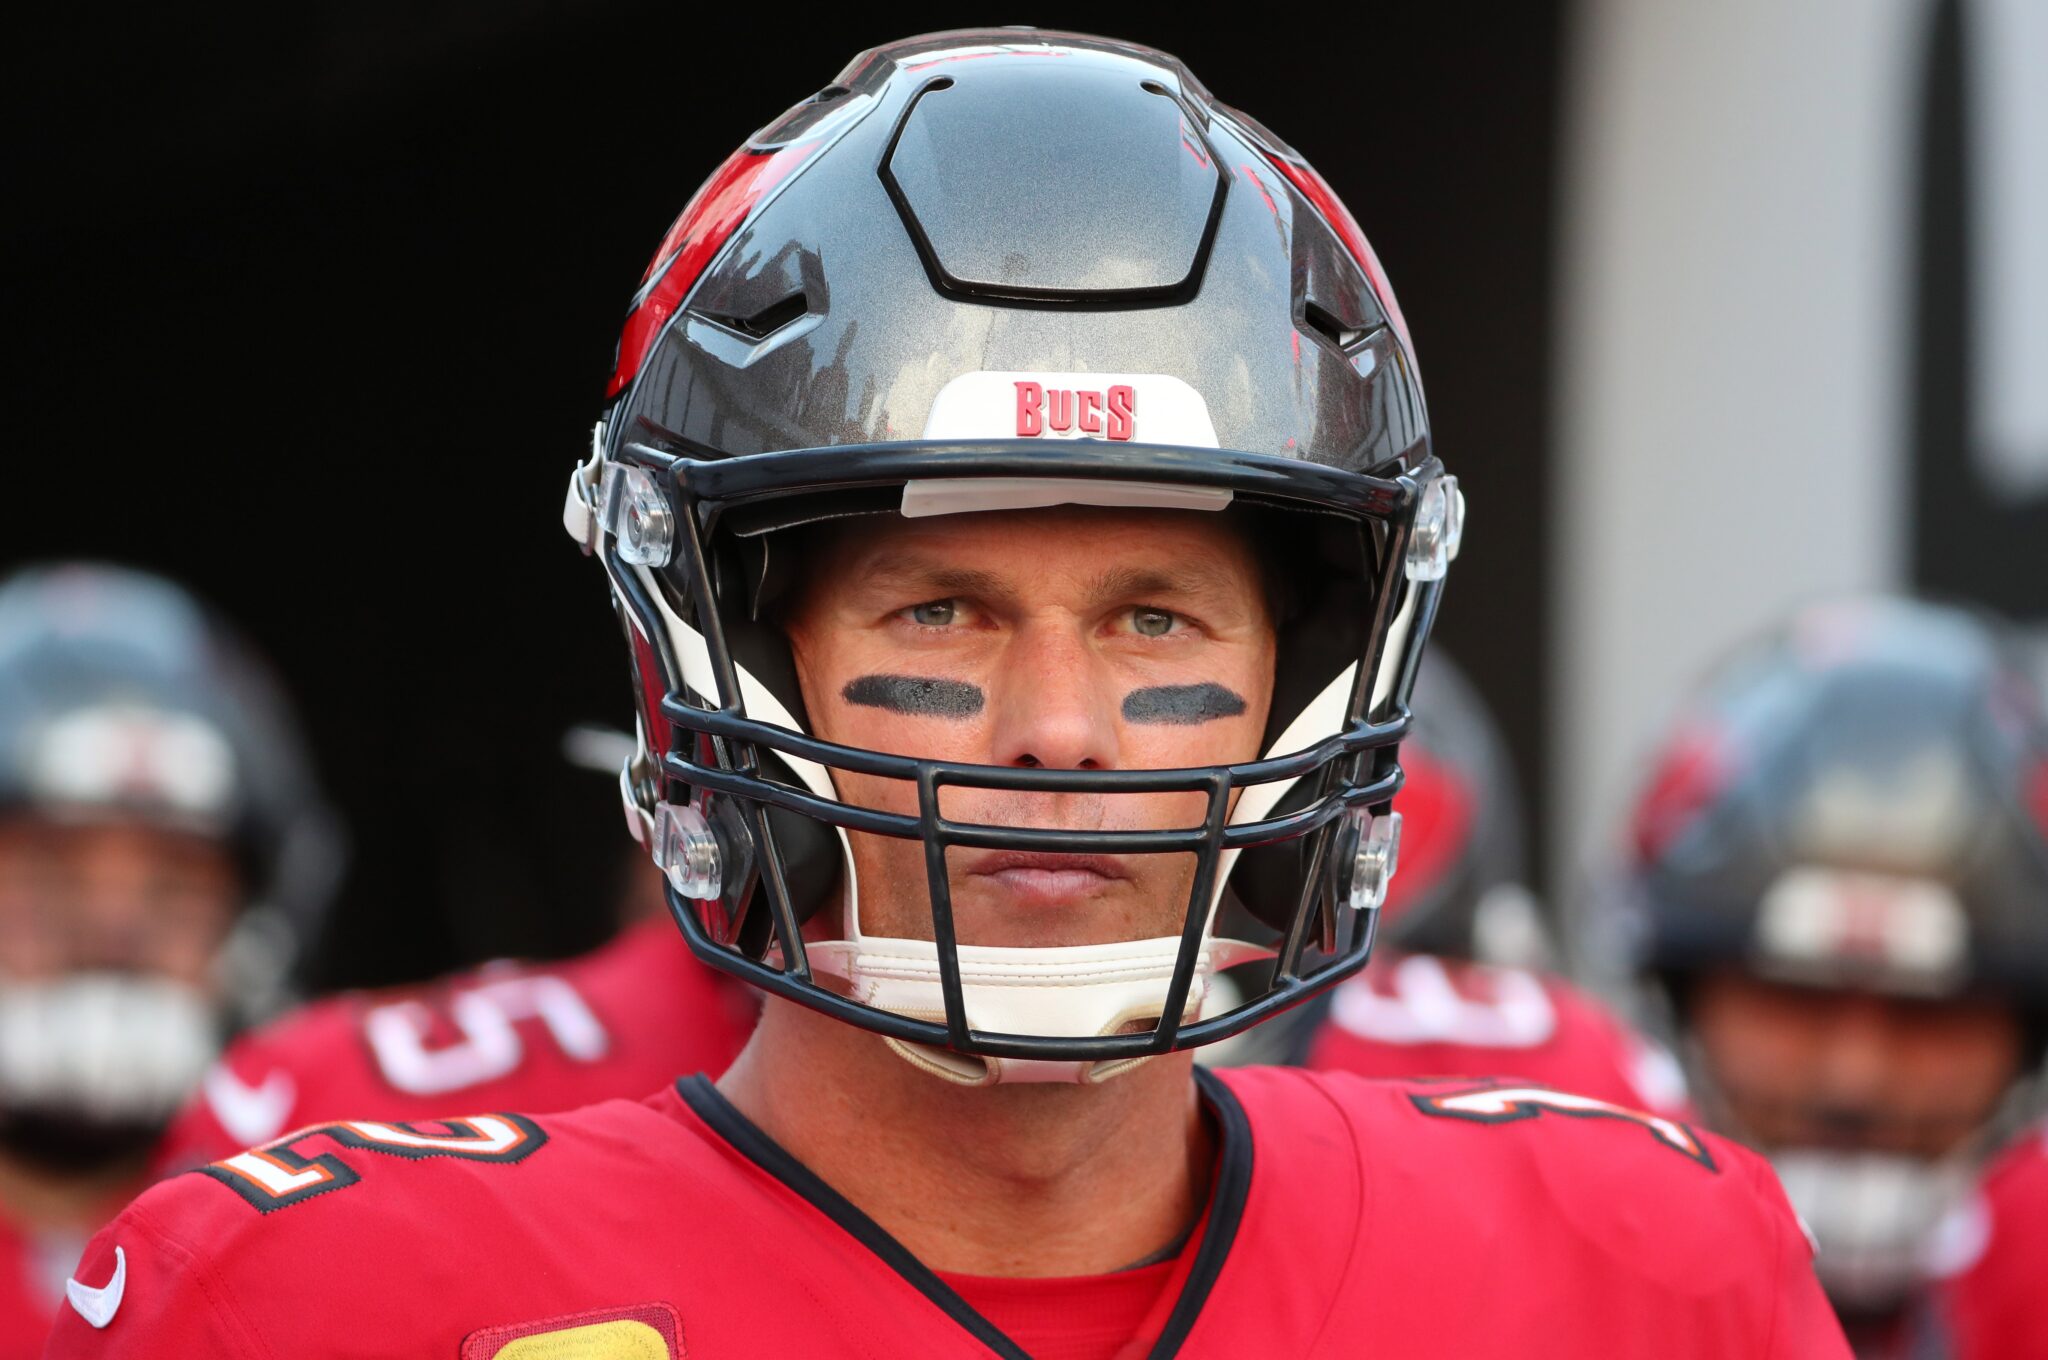 Tom Brady looks at the camera wearing his NFL helmet for the Tamba Bay Buccaneers